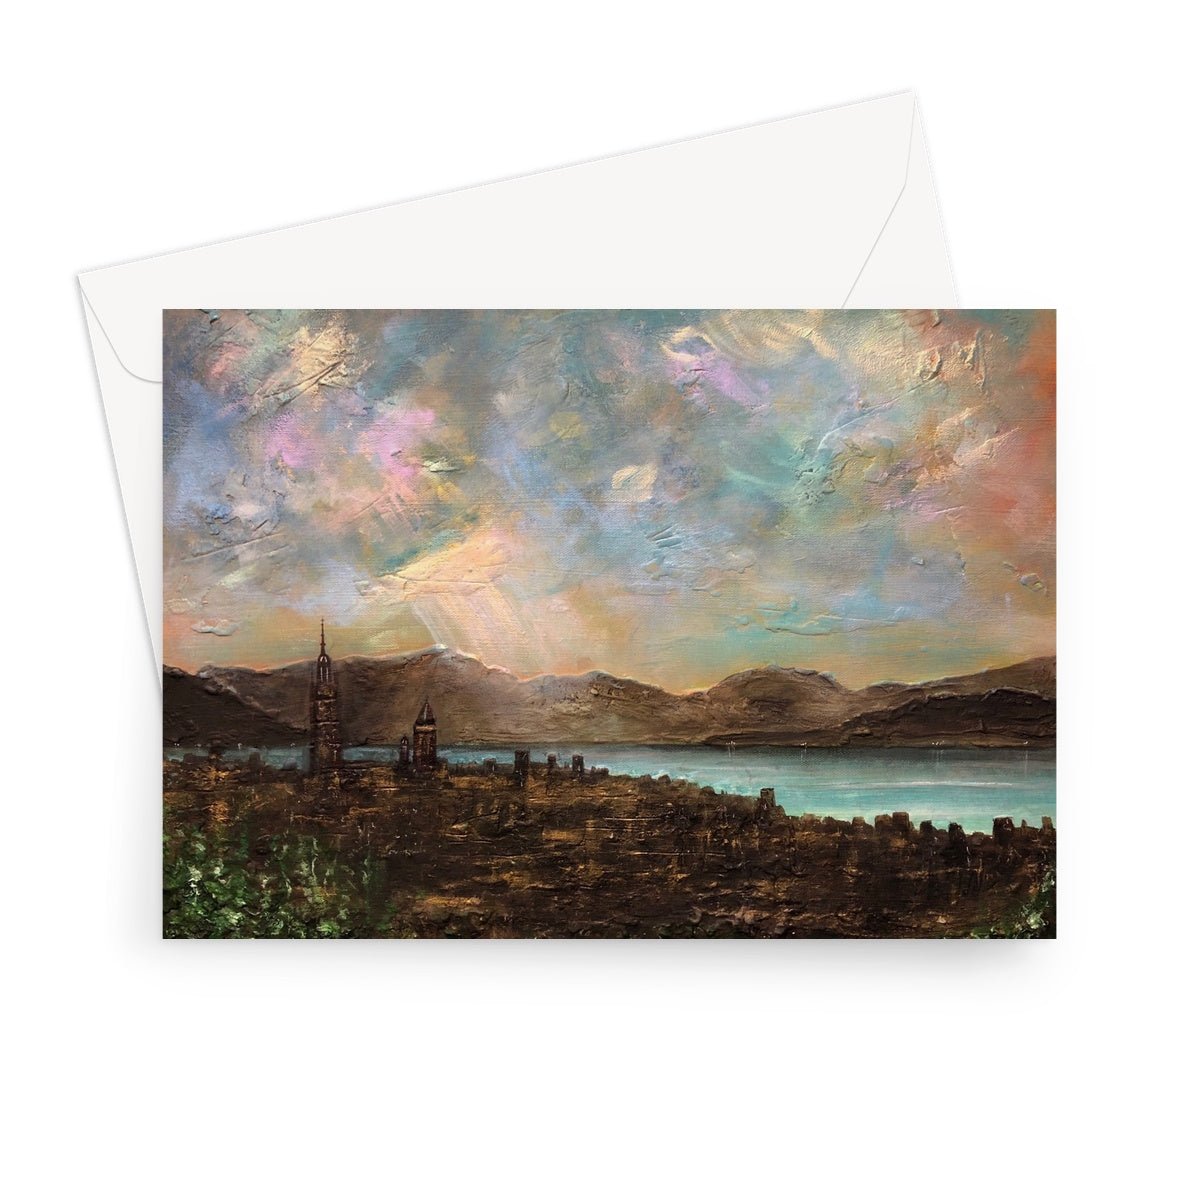 Angels Fingers Over Greenock Art Gifts Greeting Card-Greetings Cards-River Clyde Art Gallery-7"x5"-1 Card-Paintings, Prints, Homeware, Art Gifts From Scotland By Scottish Artist Kevin Hunter